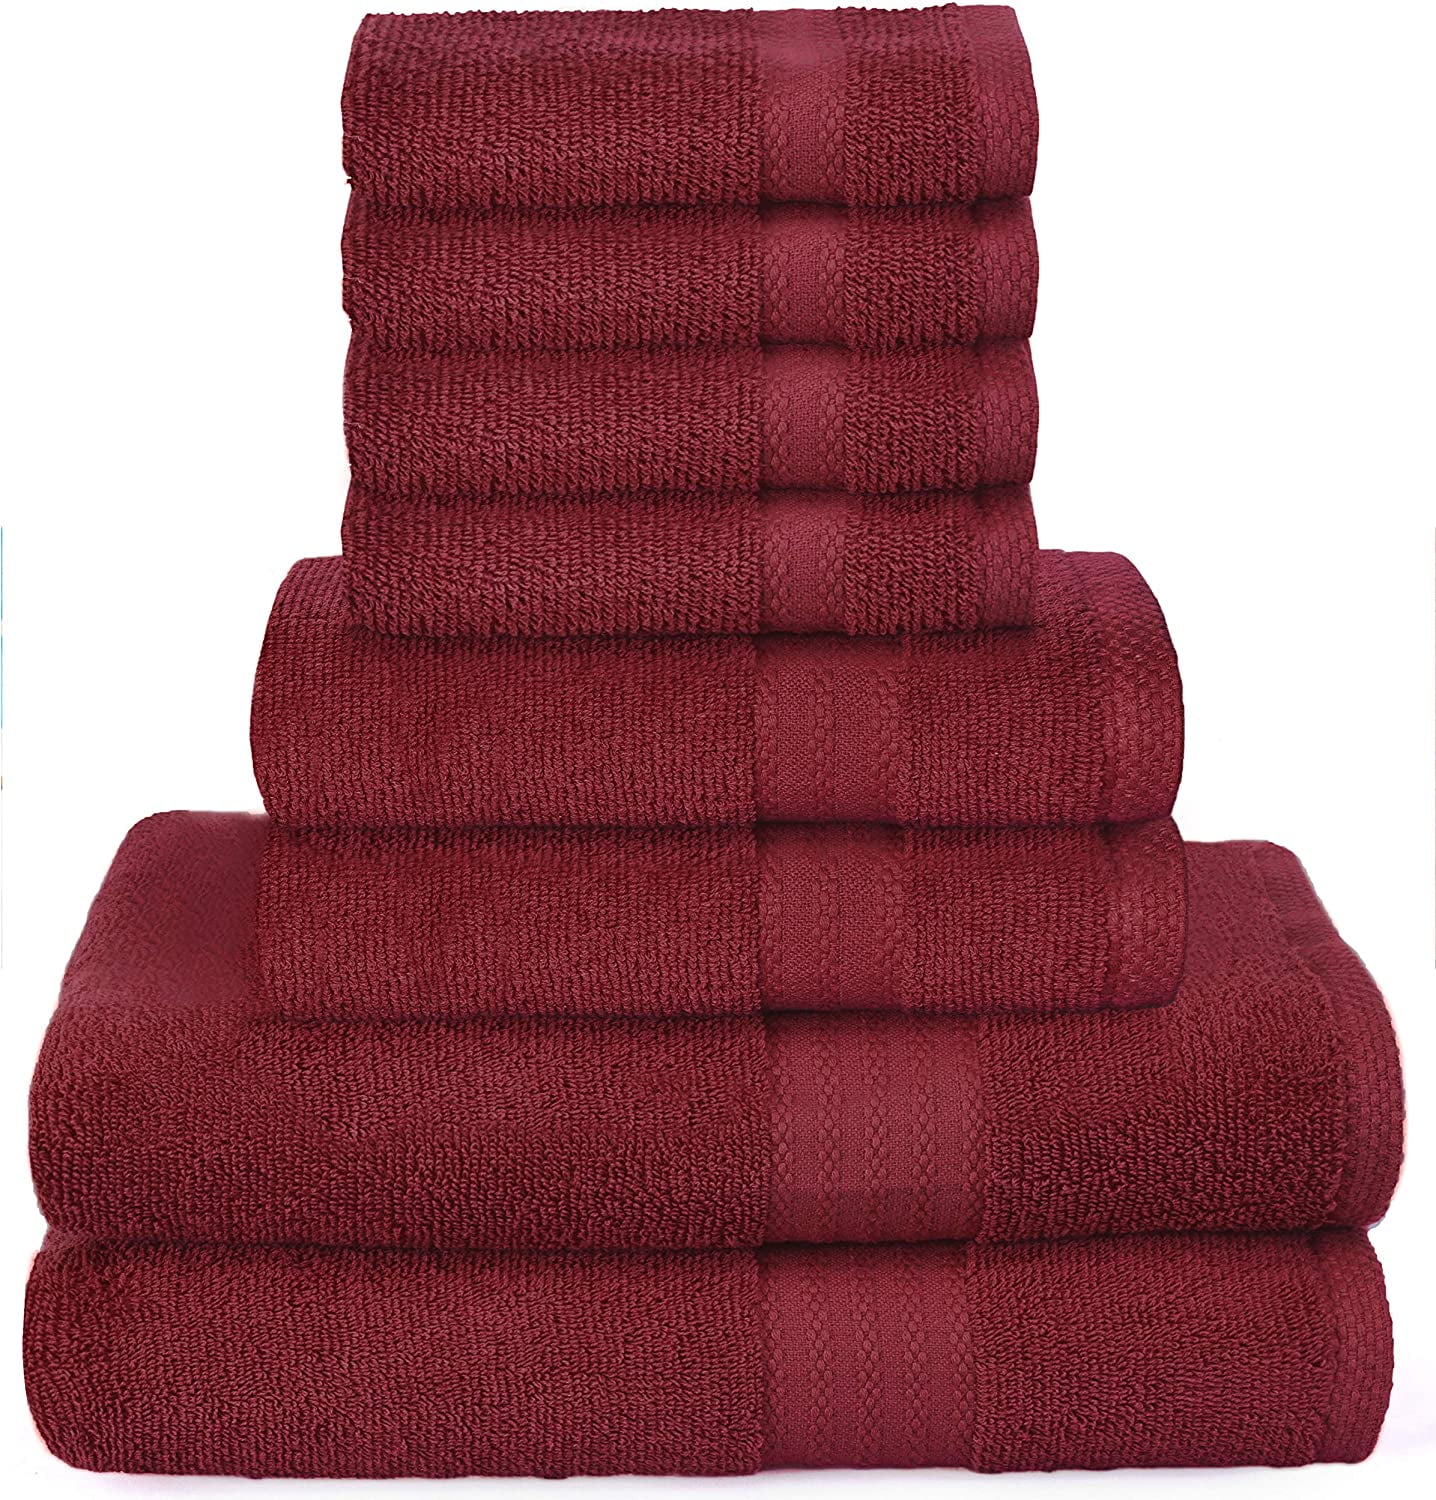 TKM Home Ultra Soft 8-Piece Towel Set - 100% Pure Ringspun Cotton, Contains 2 Oversized Bath Towels 27X54, 2 Hand Towels 16X2…